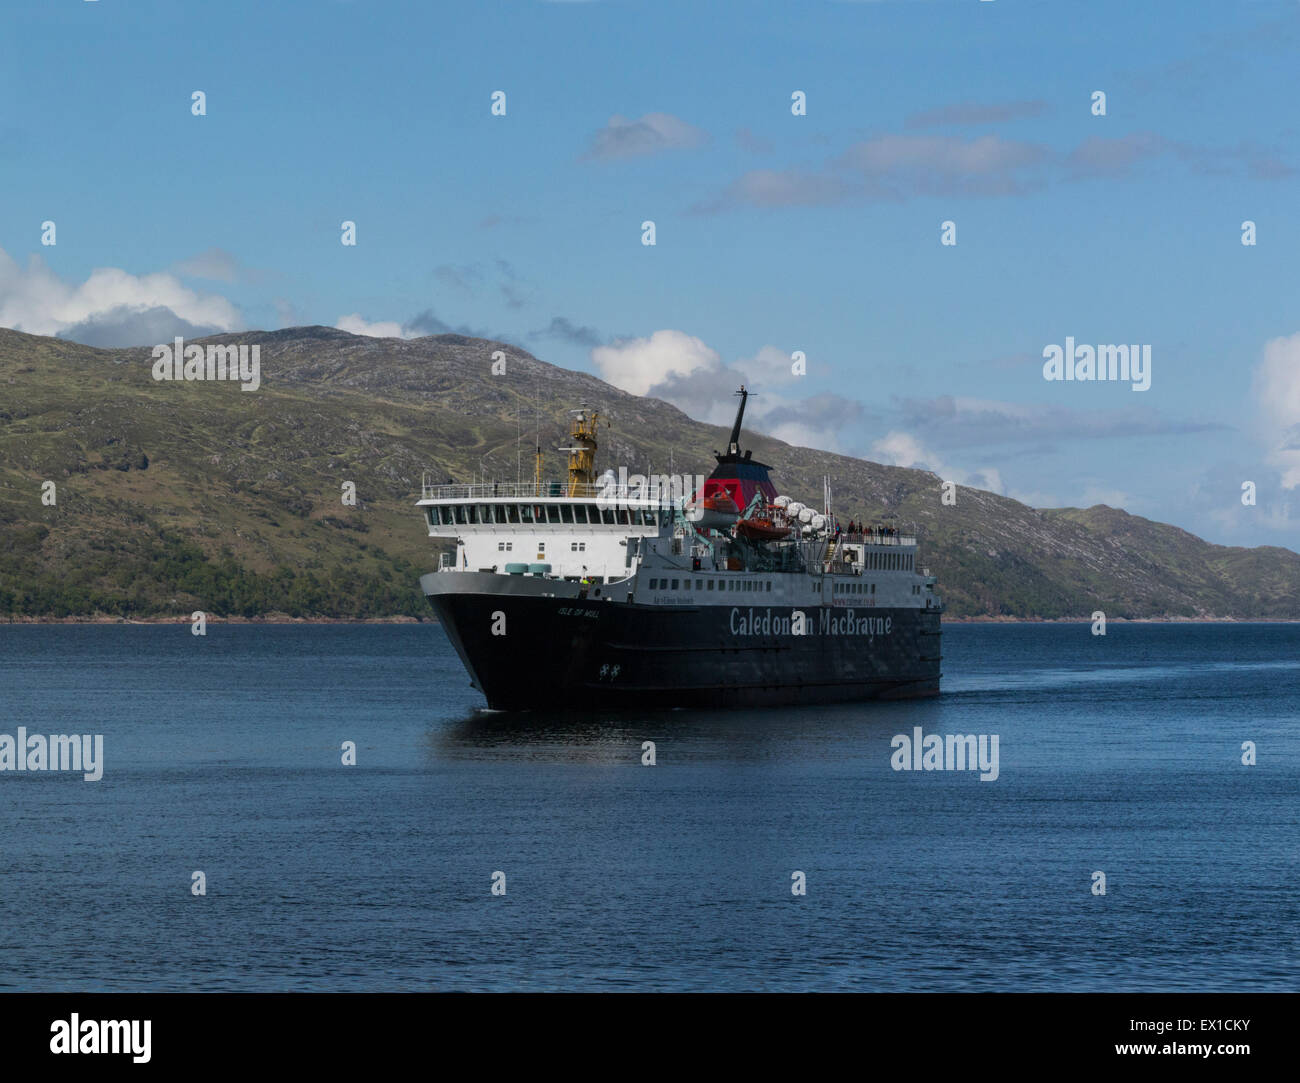 Calmac ferry from Oban crossing Sound of Mull Argyll and Bute Scotland connecting islands to mainland on a lovely June day weather blue sky Stock Photo